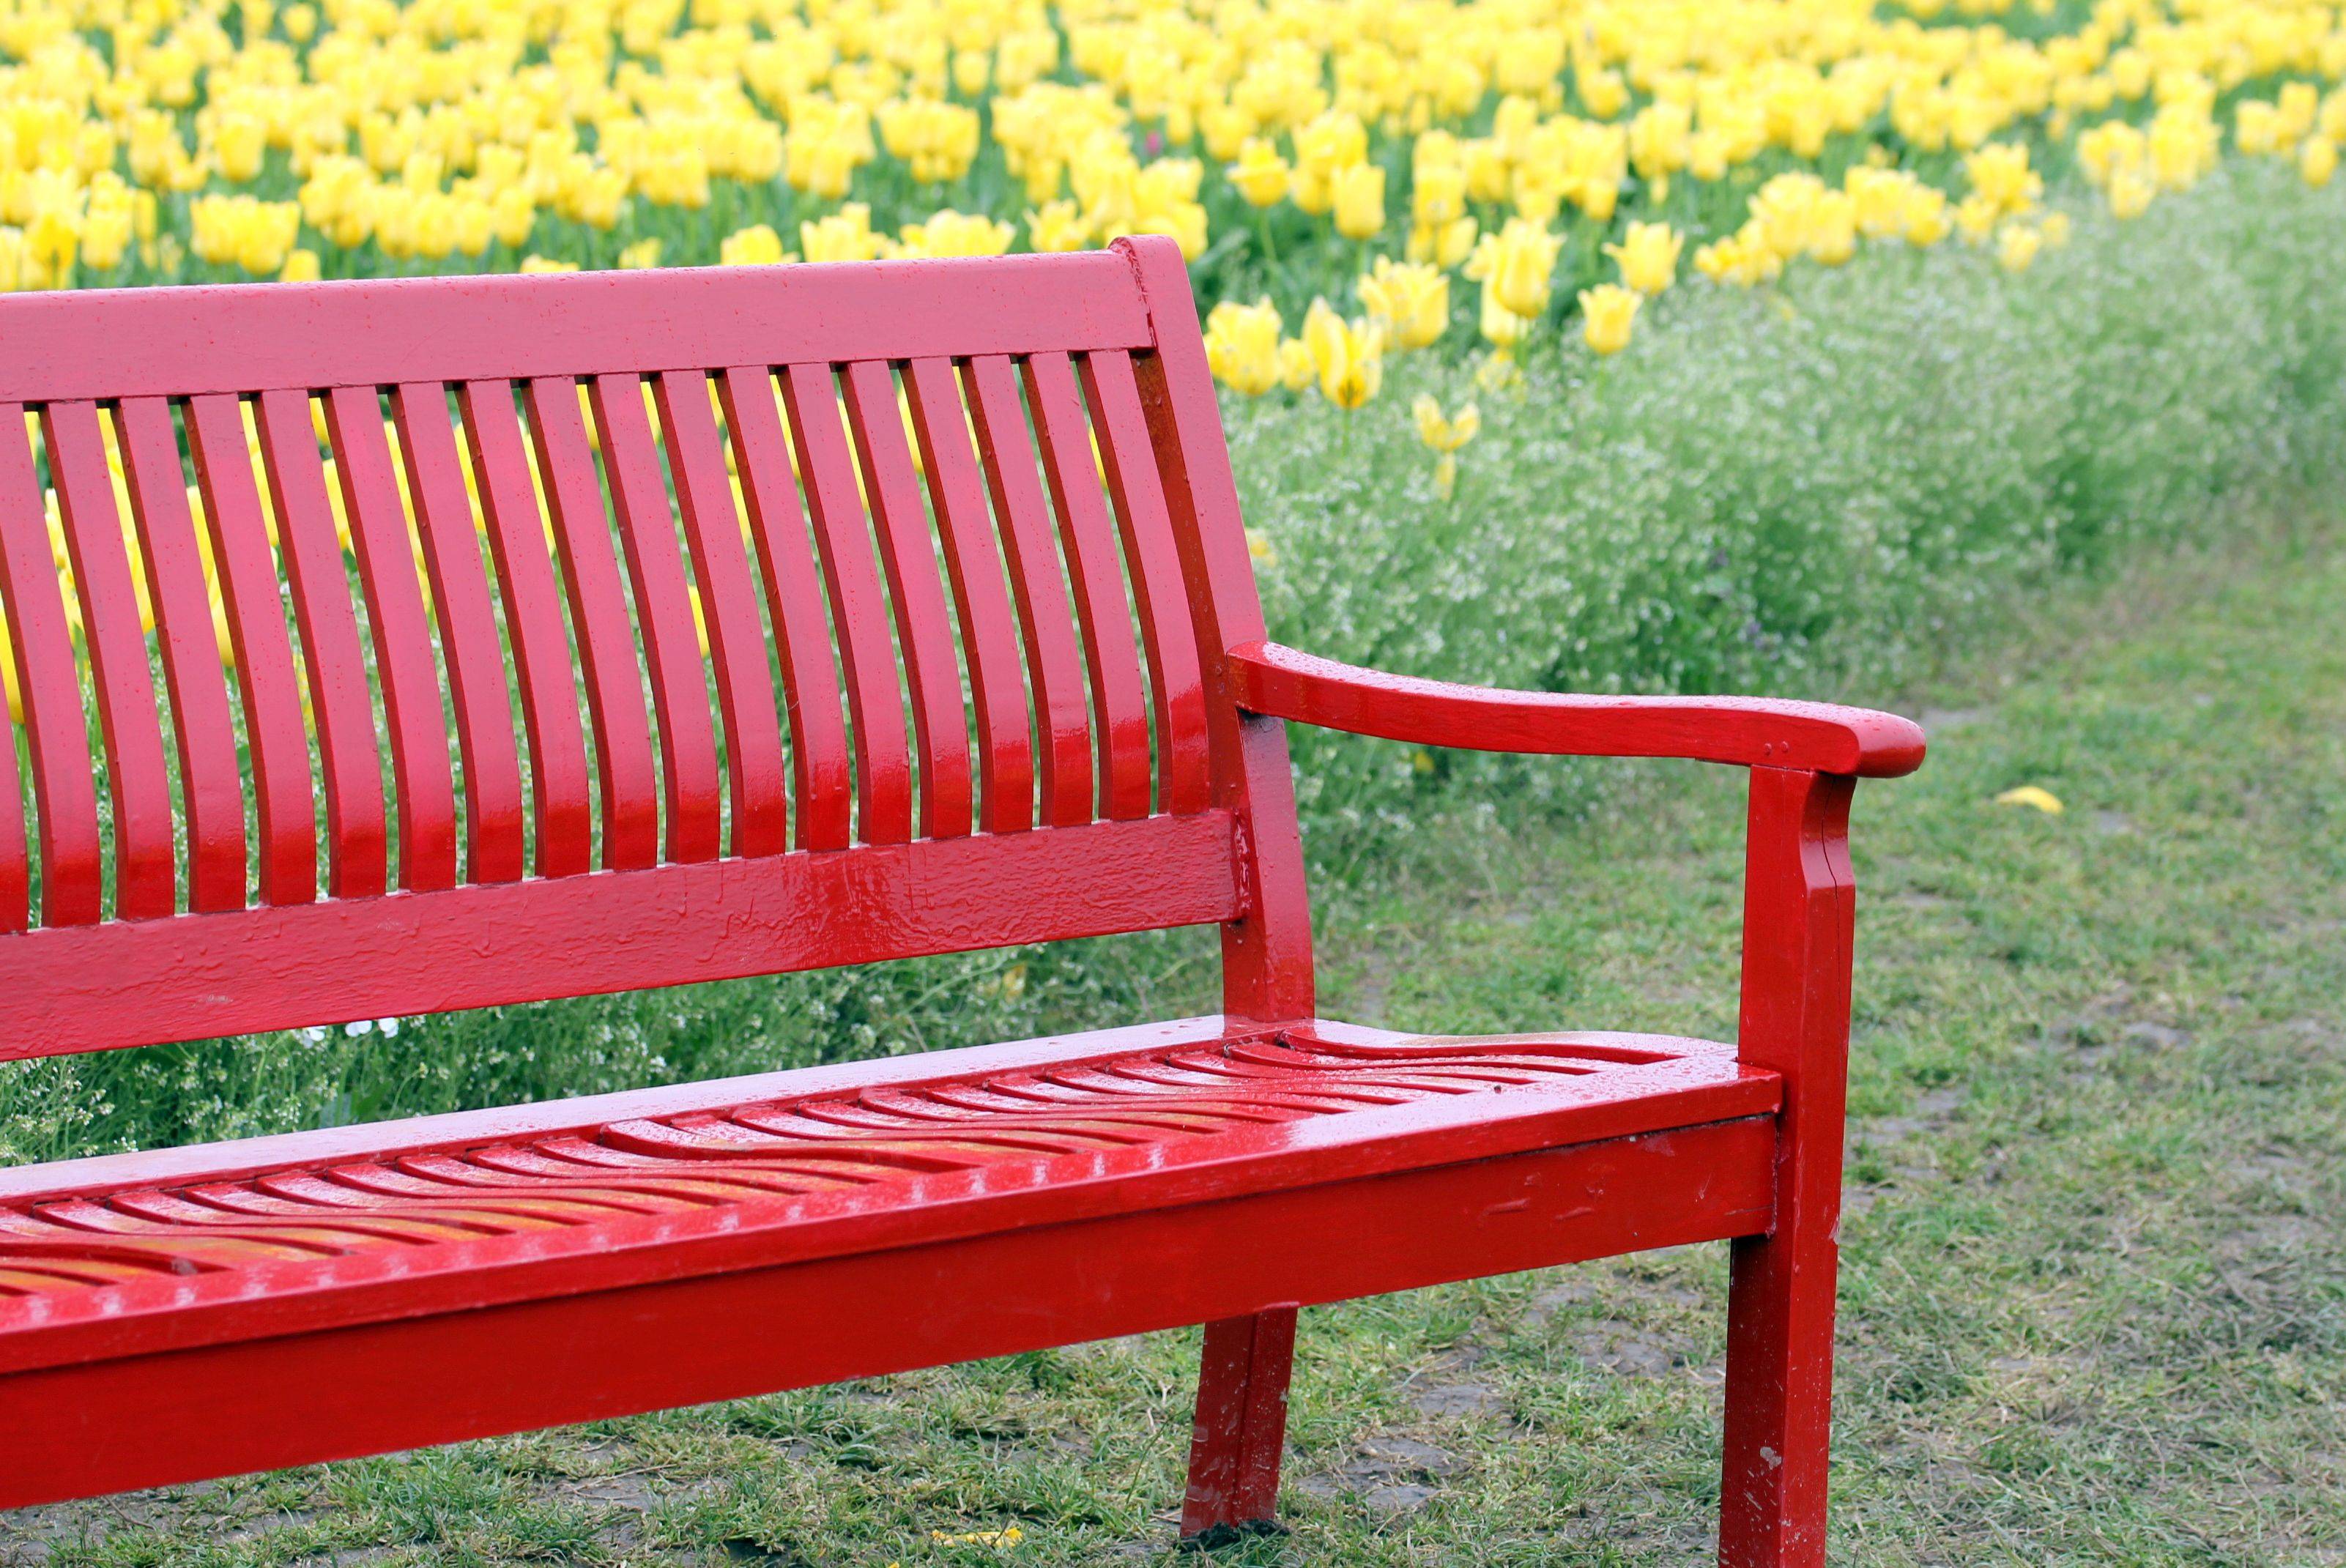 This Awesome Garden Bench Yellow Ideas